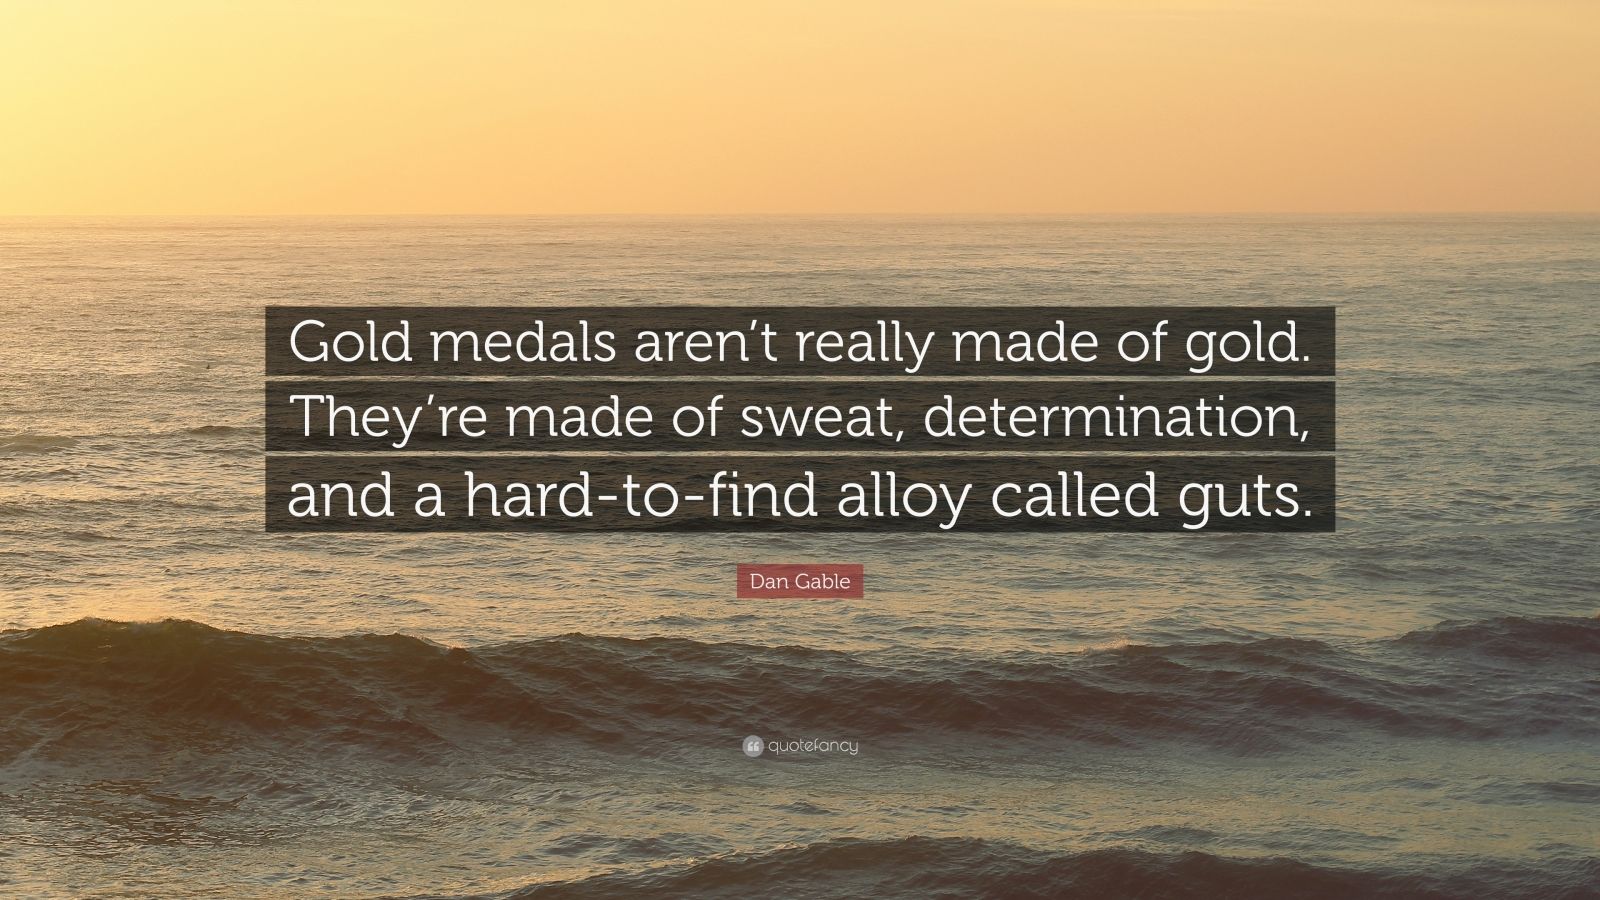 Dan Gable Quote: "Gold medals aren't really made of gold ...